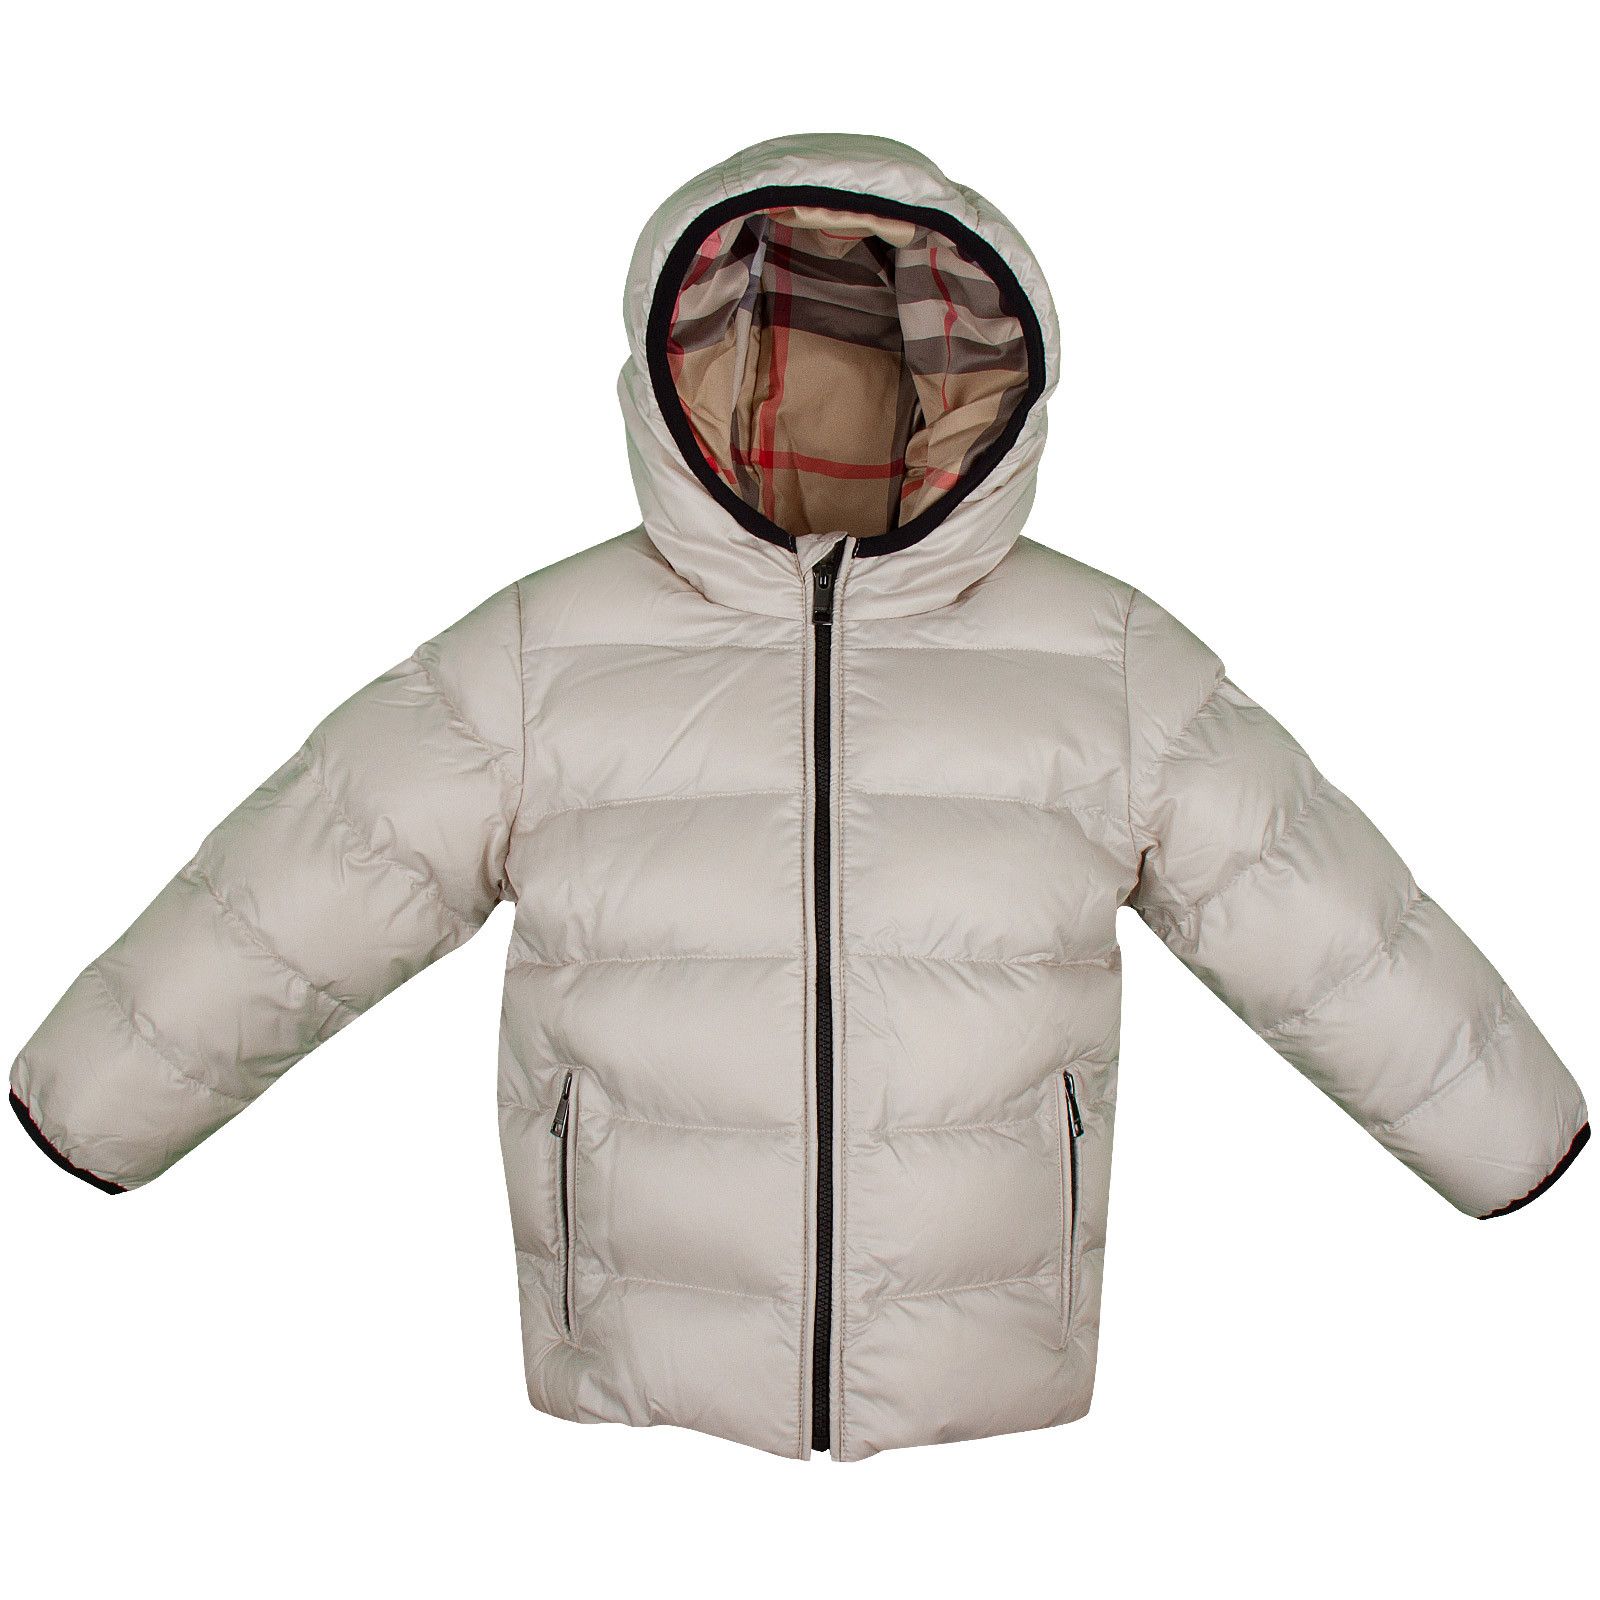 Boys Olive Green Classic Puffer Jacket  With Beige Check Hood - CÉMAROSE | Children's Fashion Store - 1